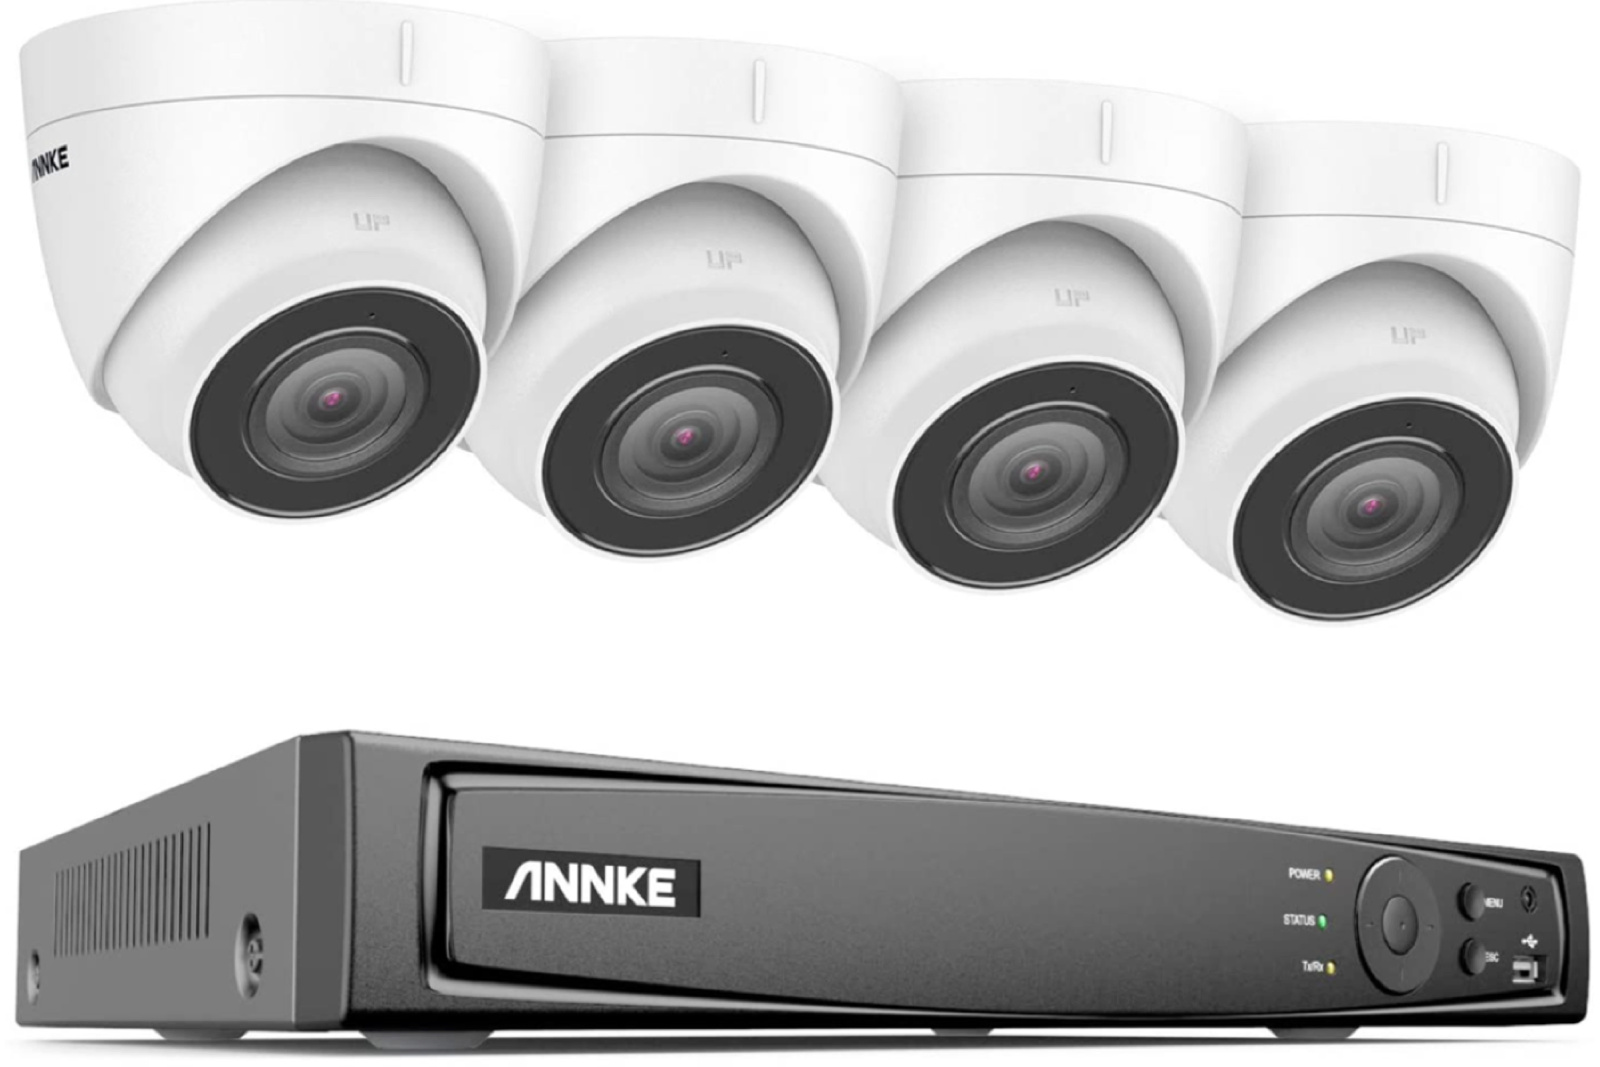 Annke home security deals for Prime Day photo 14